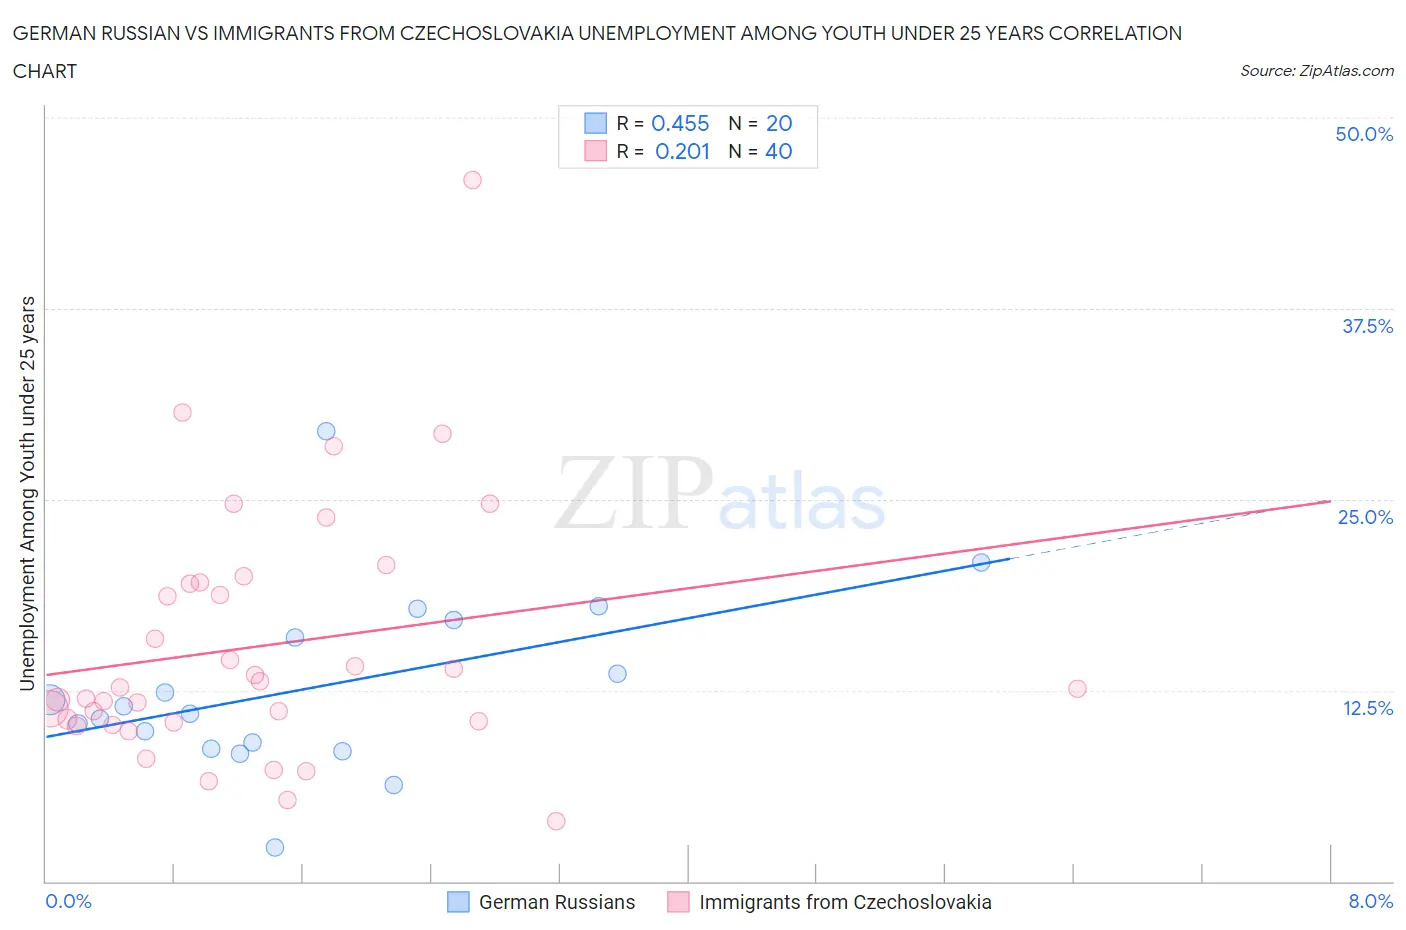 German Russian vs Immigrants from Czechoslovakia Unemployment Among Youth under 25 years